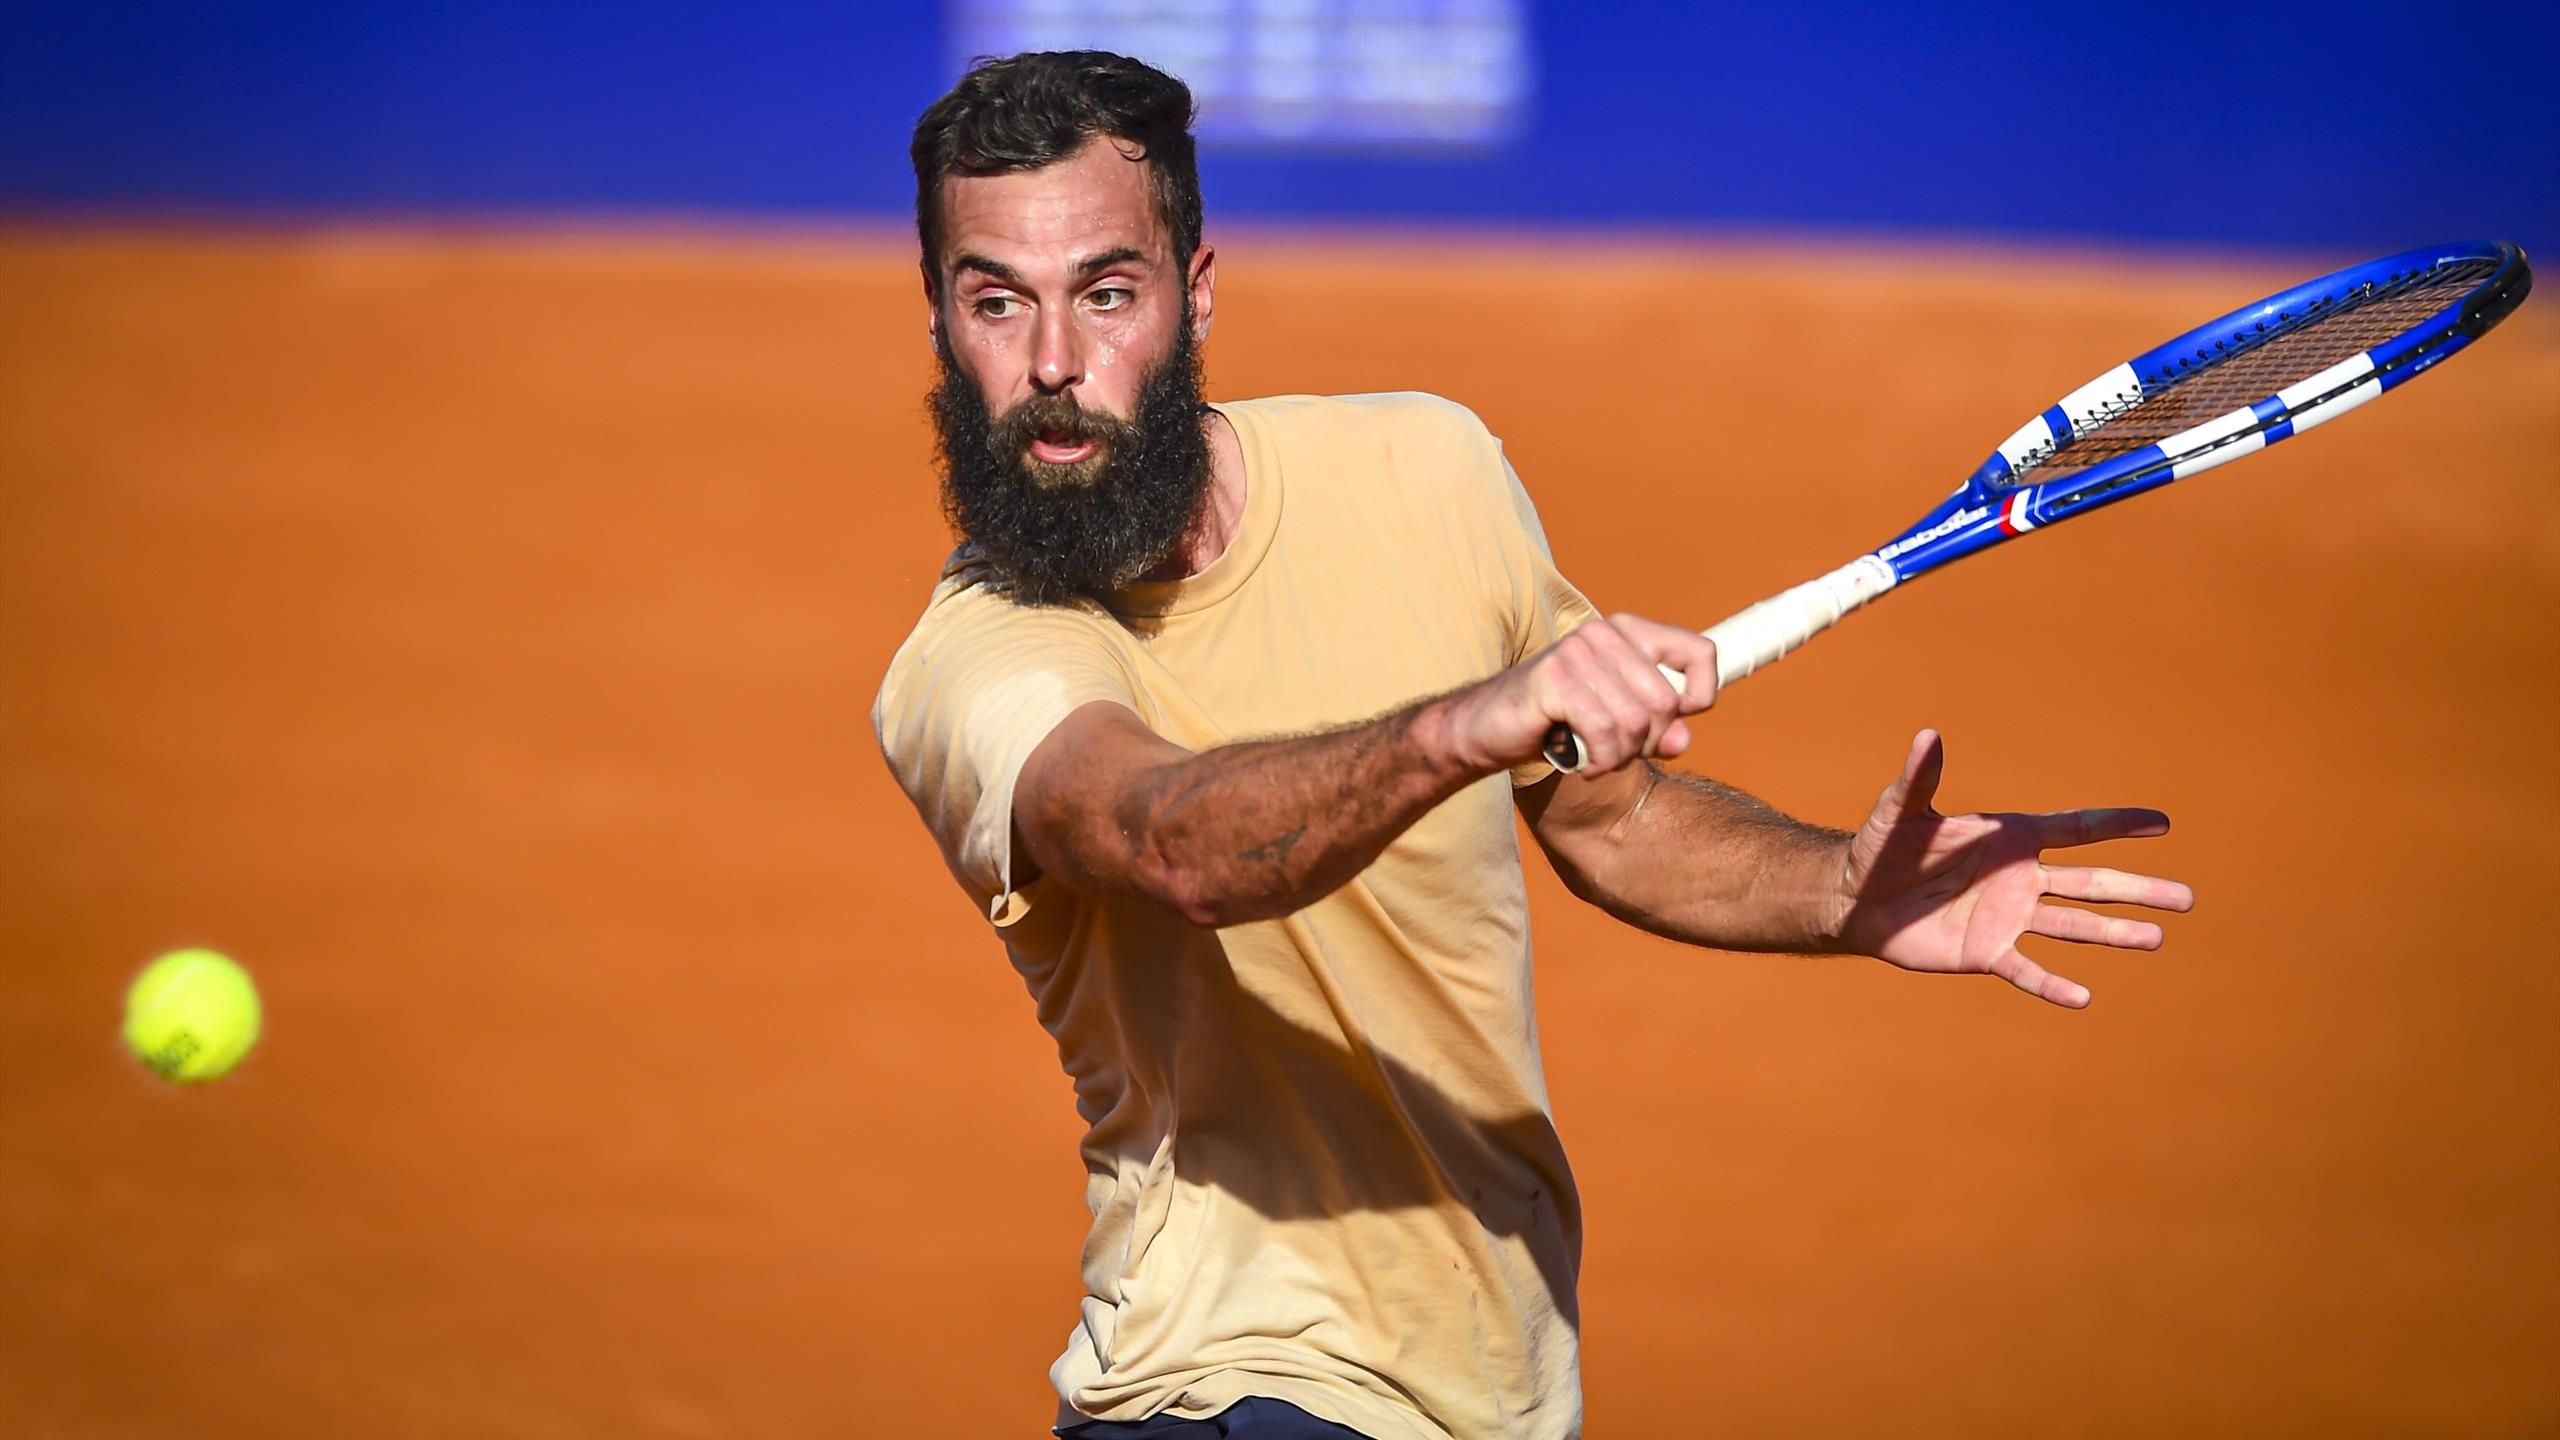 Tennis News France S Benoit Paire Spits On Court Tanks And Then Crashes Out Of Argentina Open Eurosport [ 1440 x 2560 Pixel ]